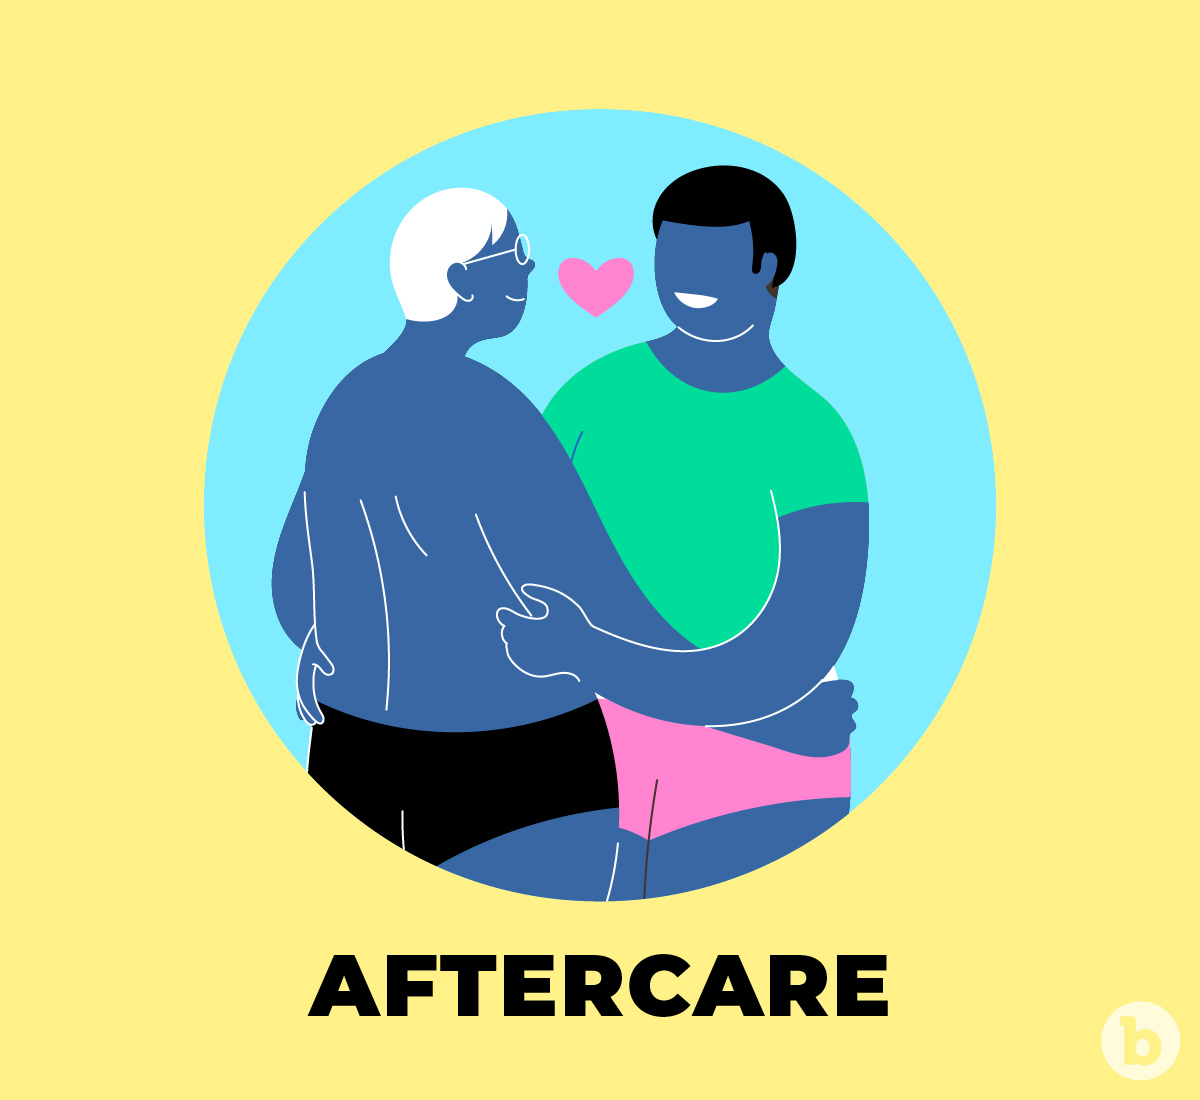 Aftercare is just as important as the act of pegging